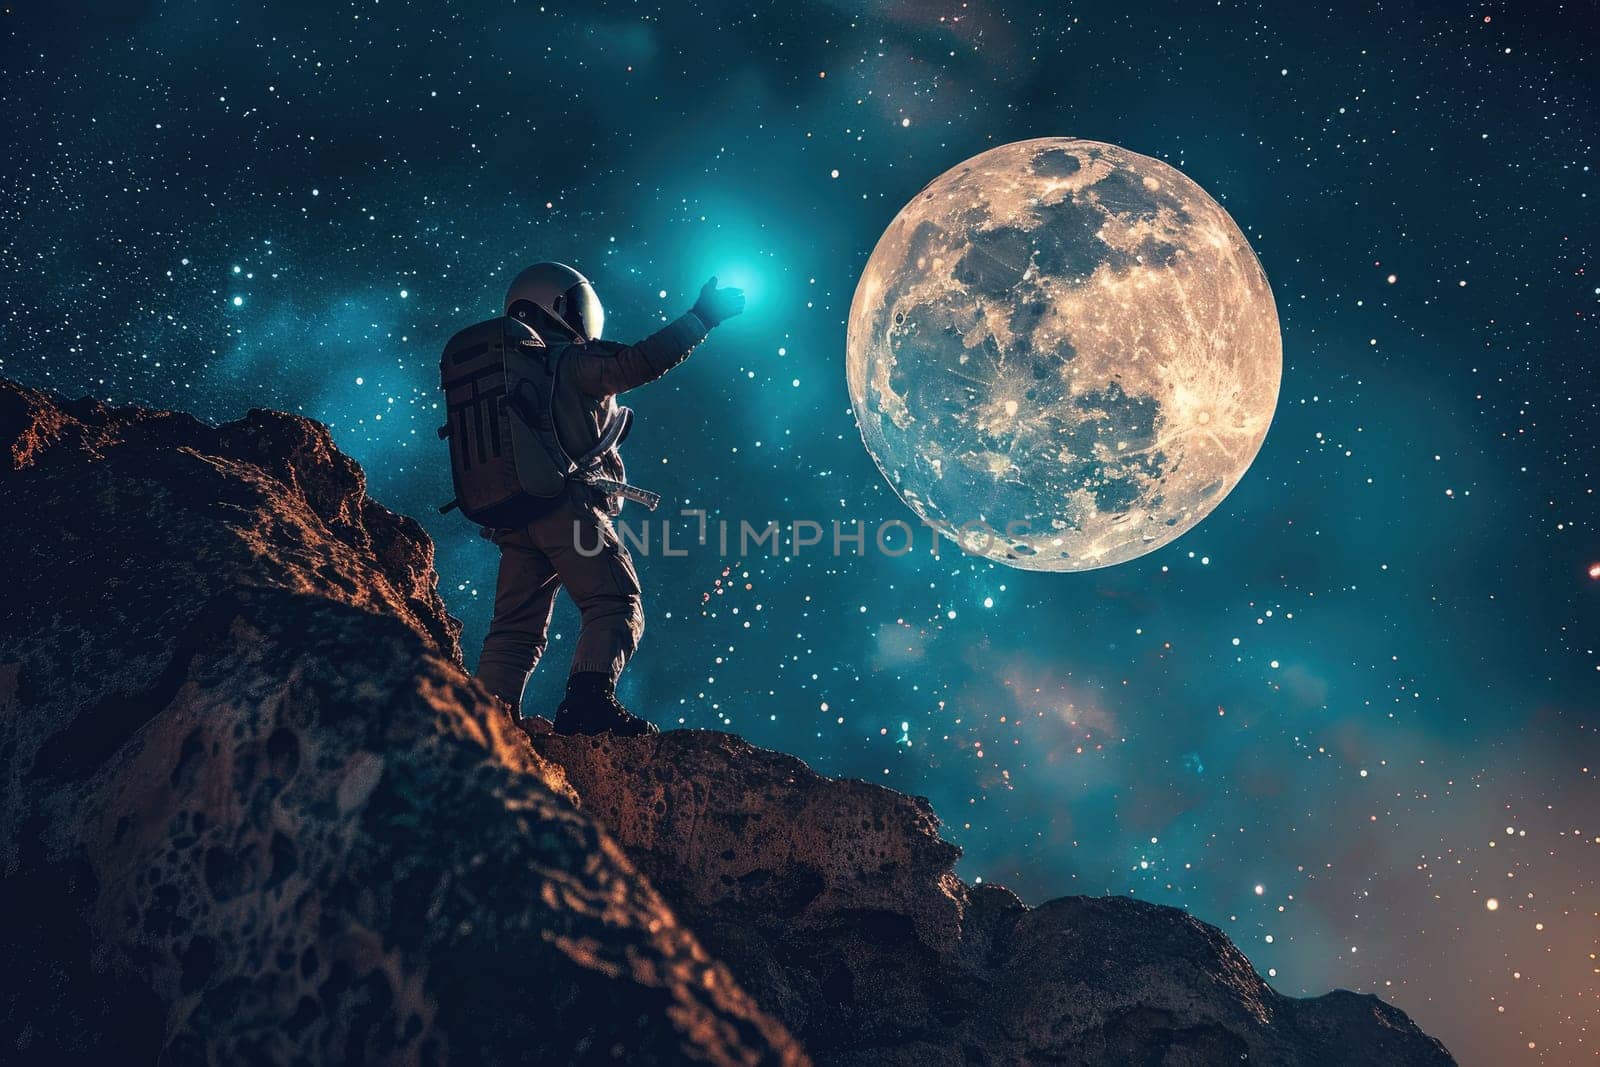 Space suit, standing on top of a mountain, reaching out to touch the full moon.